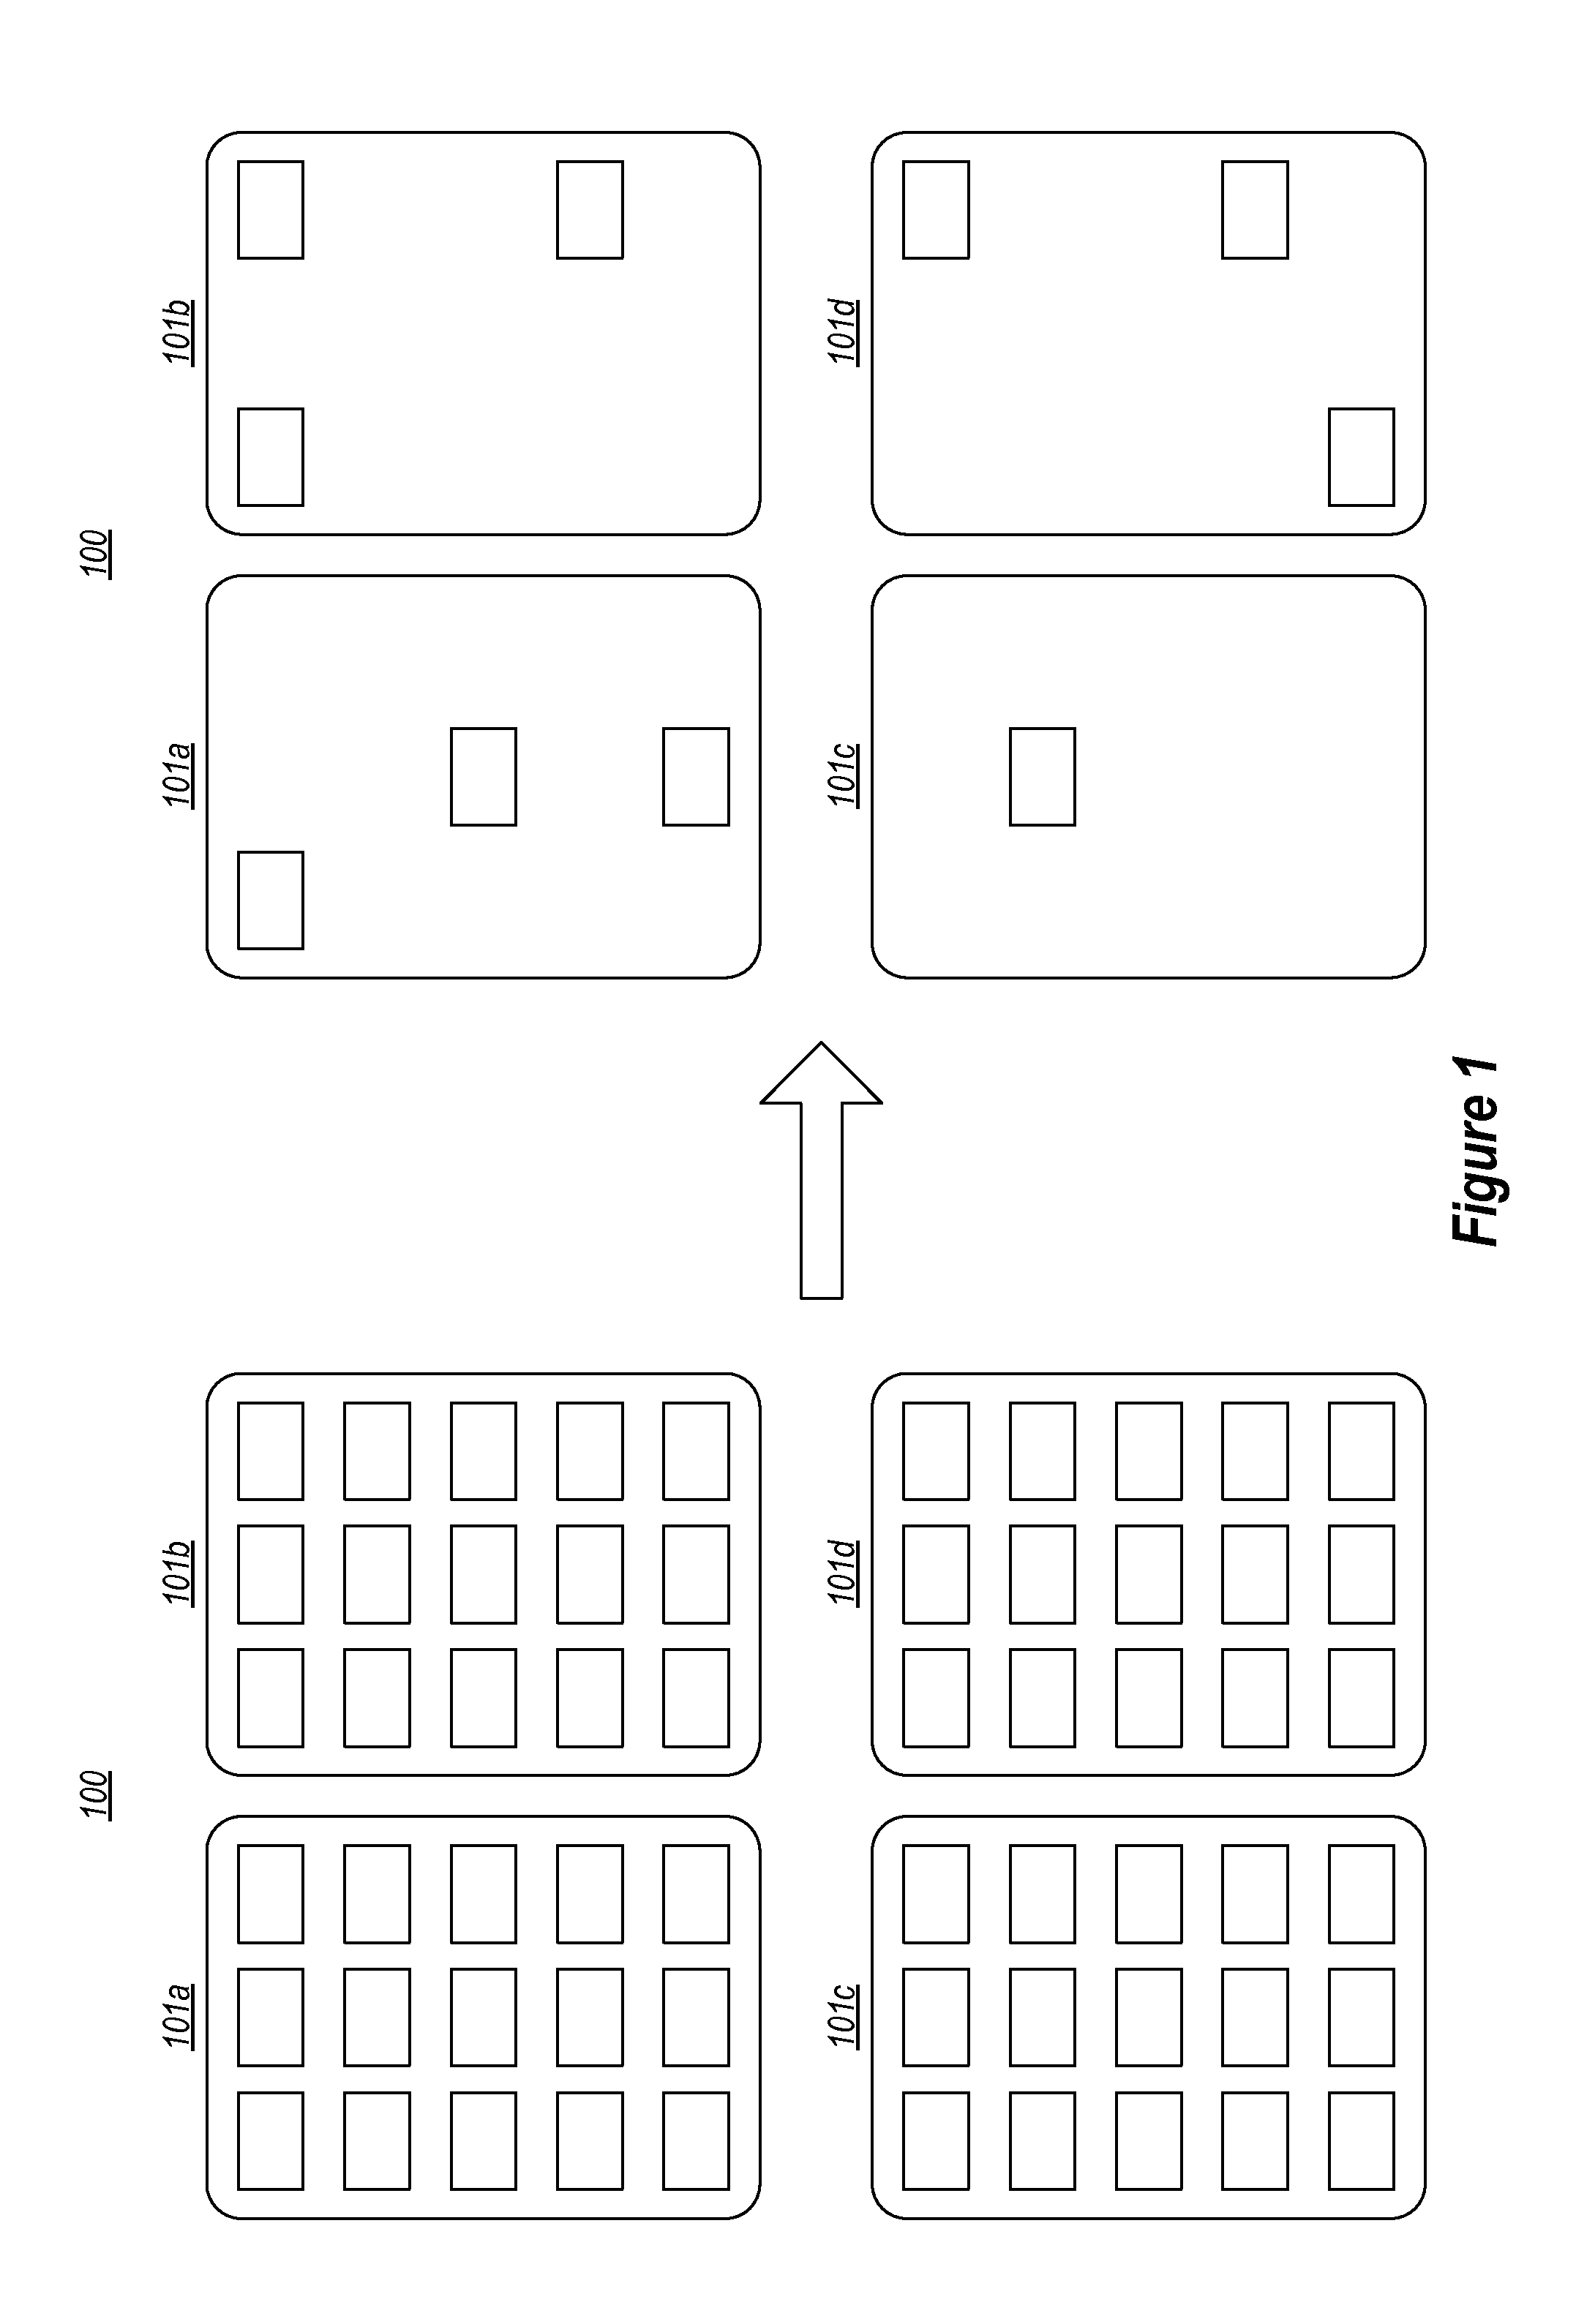 Memory compaction mechanism for main memory databases